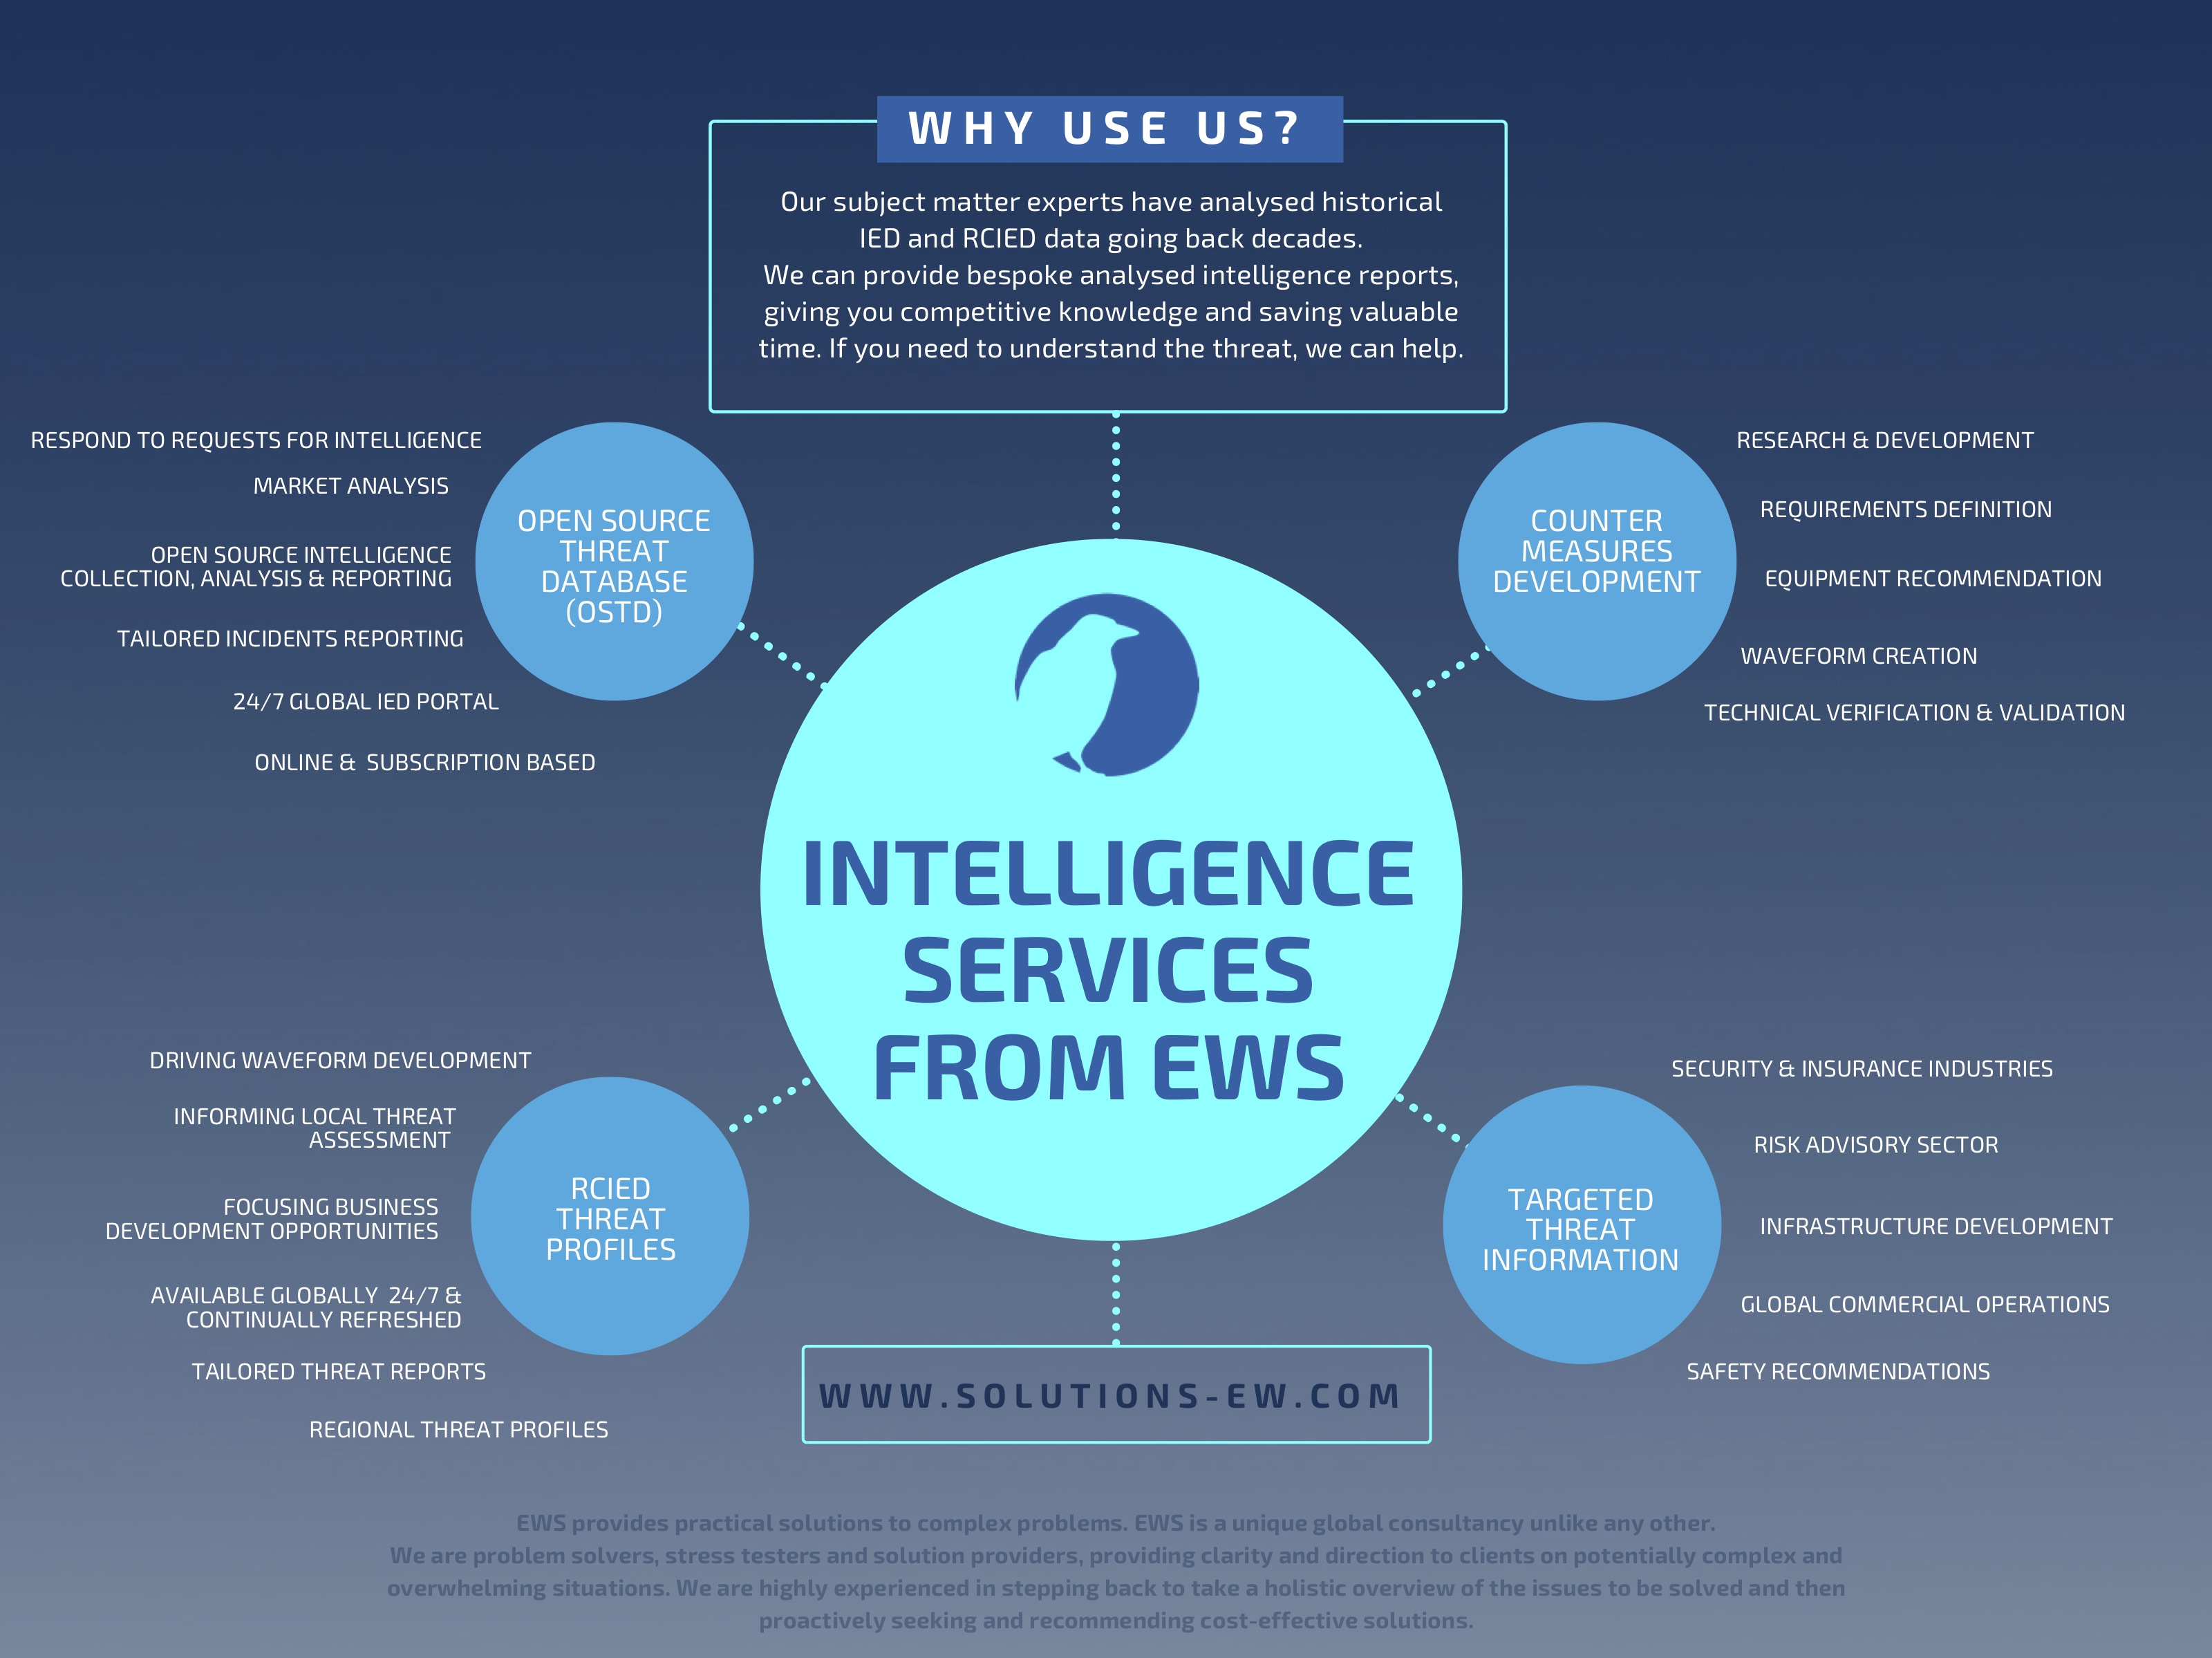 Intelligence services from EWS, open source threat intelligence